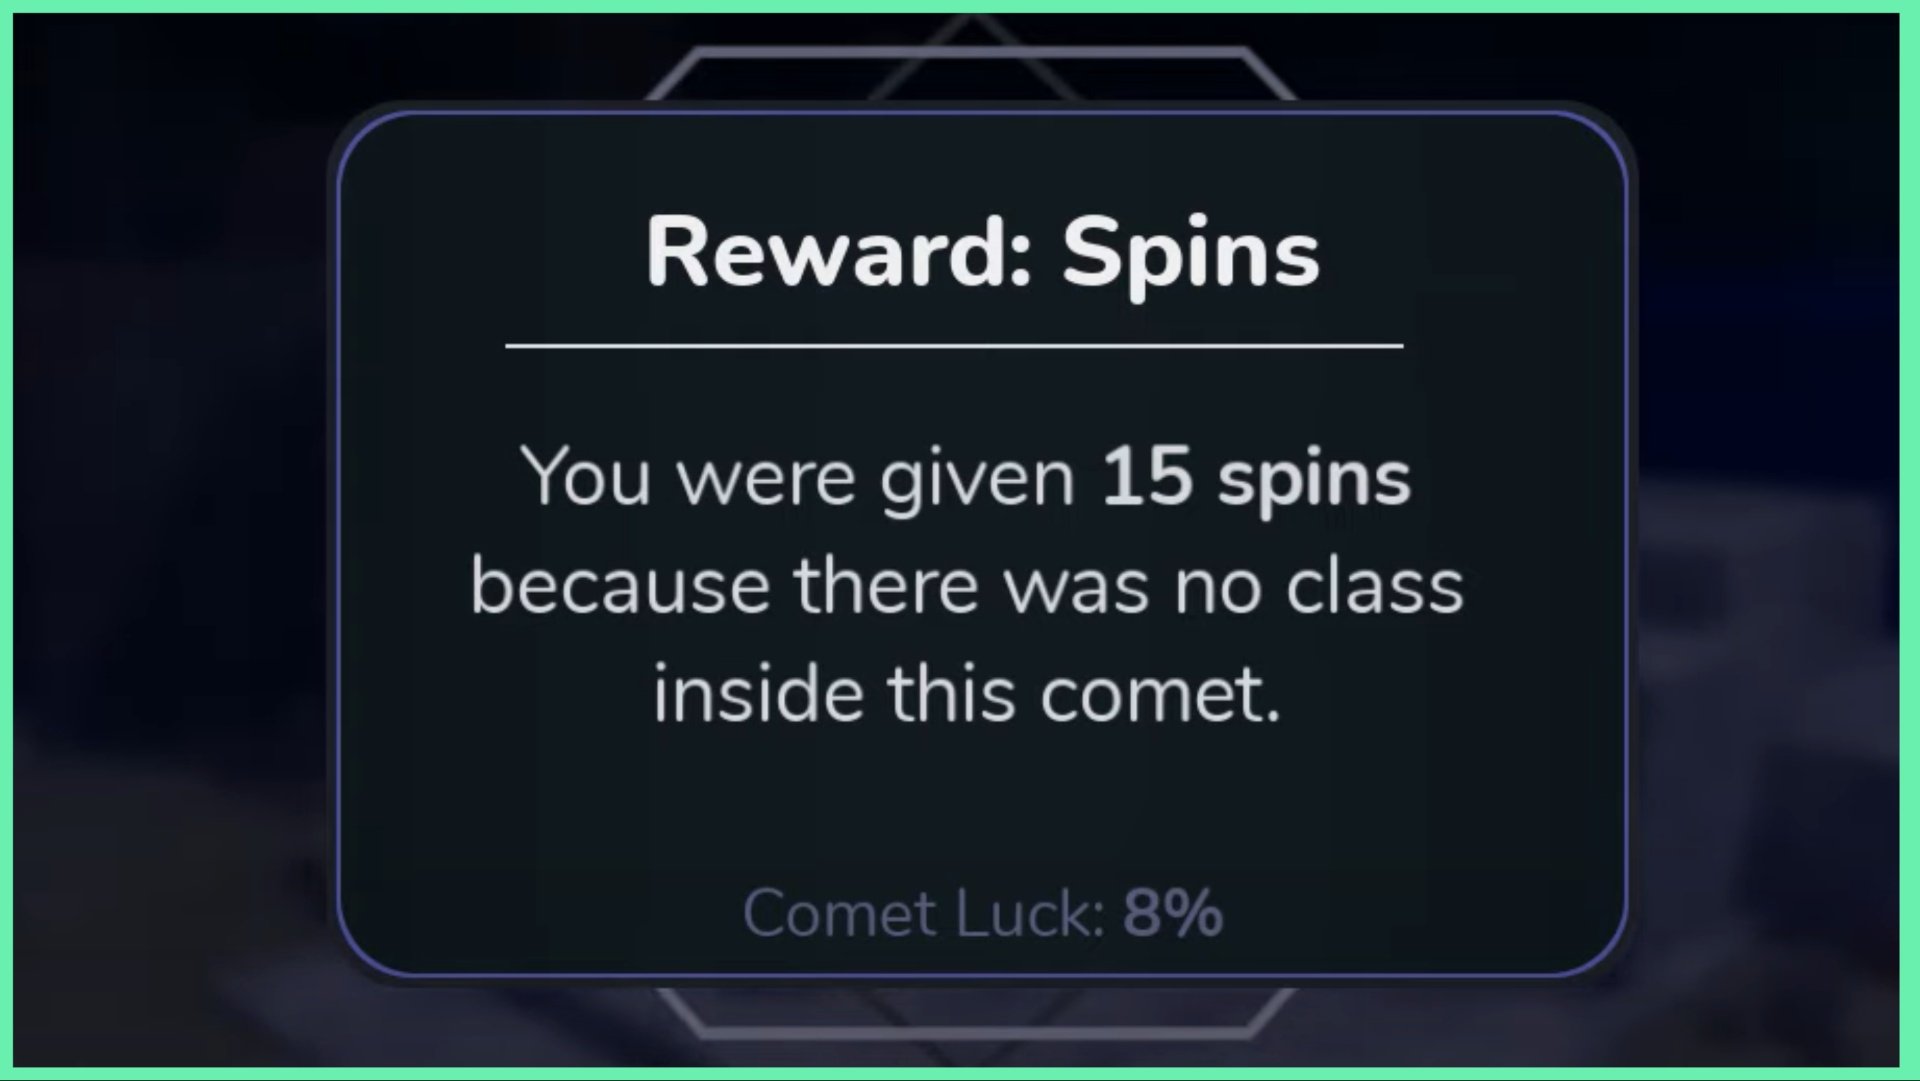 the image for our comet guide shows a player who opened the comet and was awarded with spins